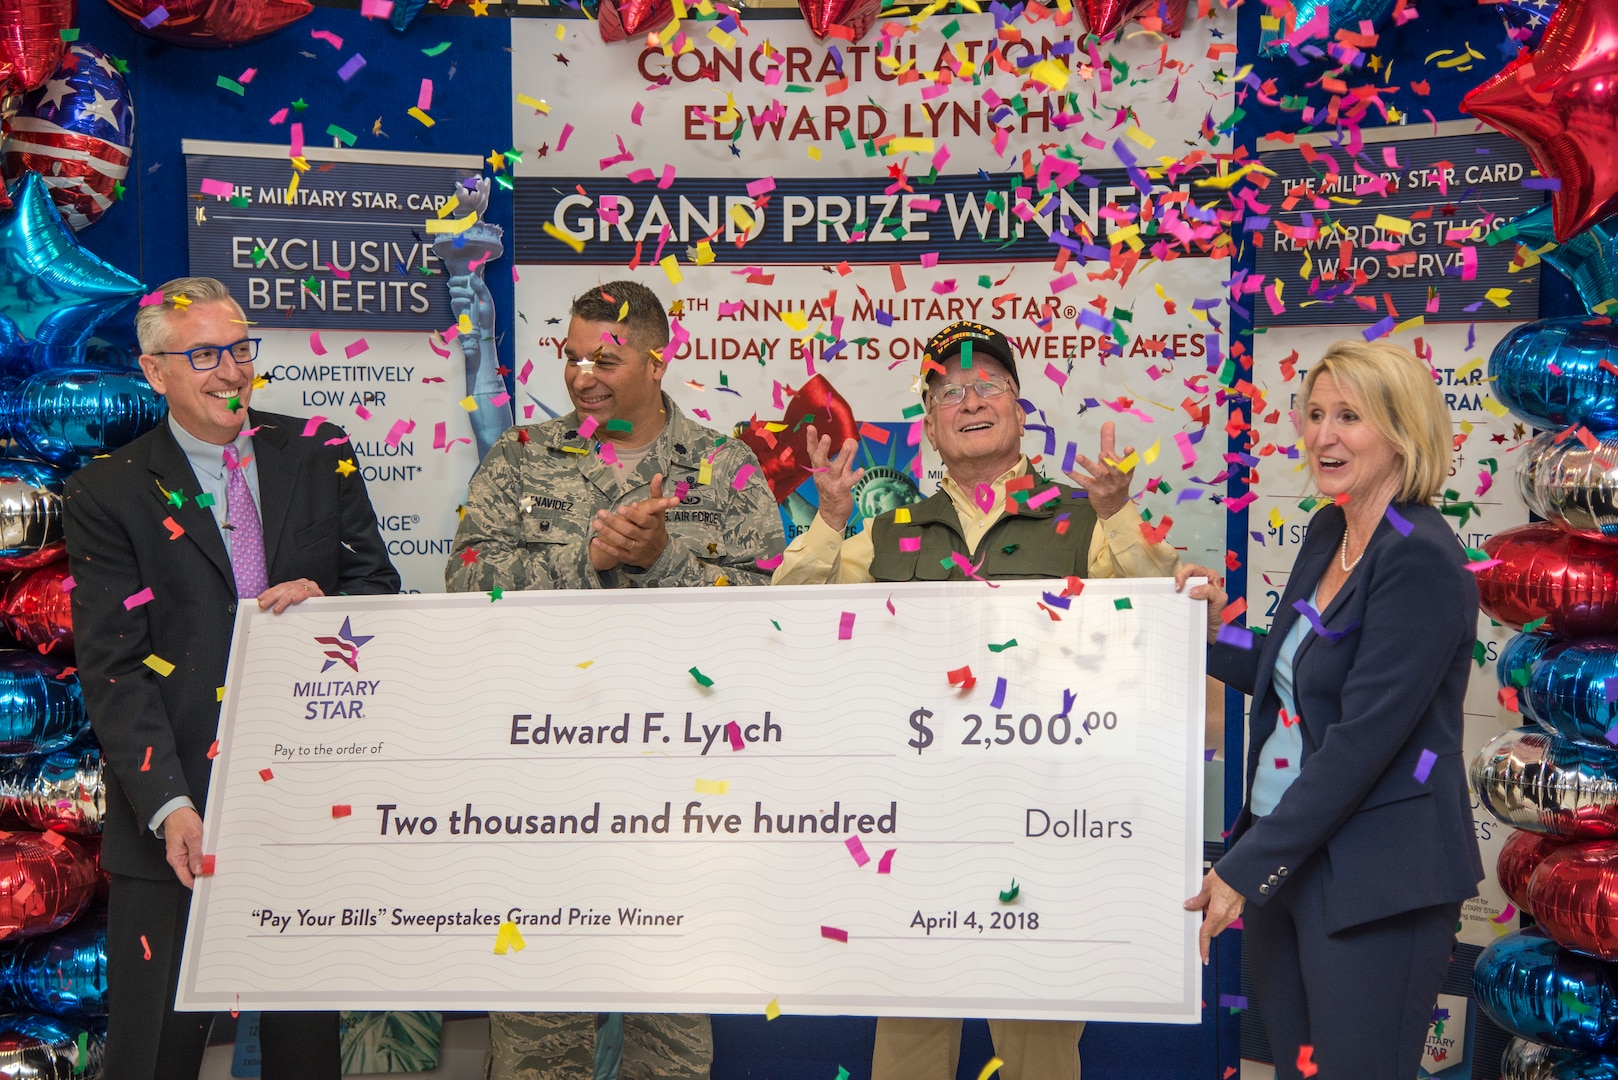 Retired Army Col. Edward Lynch (second from right) poses with (from left) James Jordan, Exchange chief financial officer; Lt. Col. Cas Benavidez, 502nd Force Support Group vice commander; and Jami Richardson, Exchange credit program senior vice president, after receiving a $2,500 check to pay off his Military Star card balance at the Joint Base San Antonio-Fort Sam Houston Exchange April 4. Lynch was entered into the contest when he used his card last fall to make a purchase.